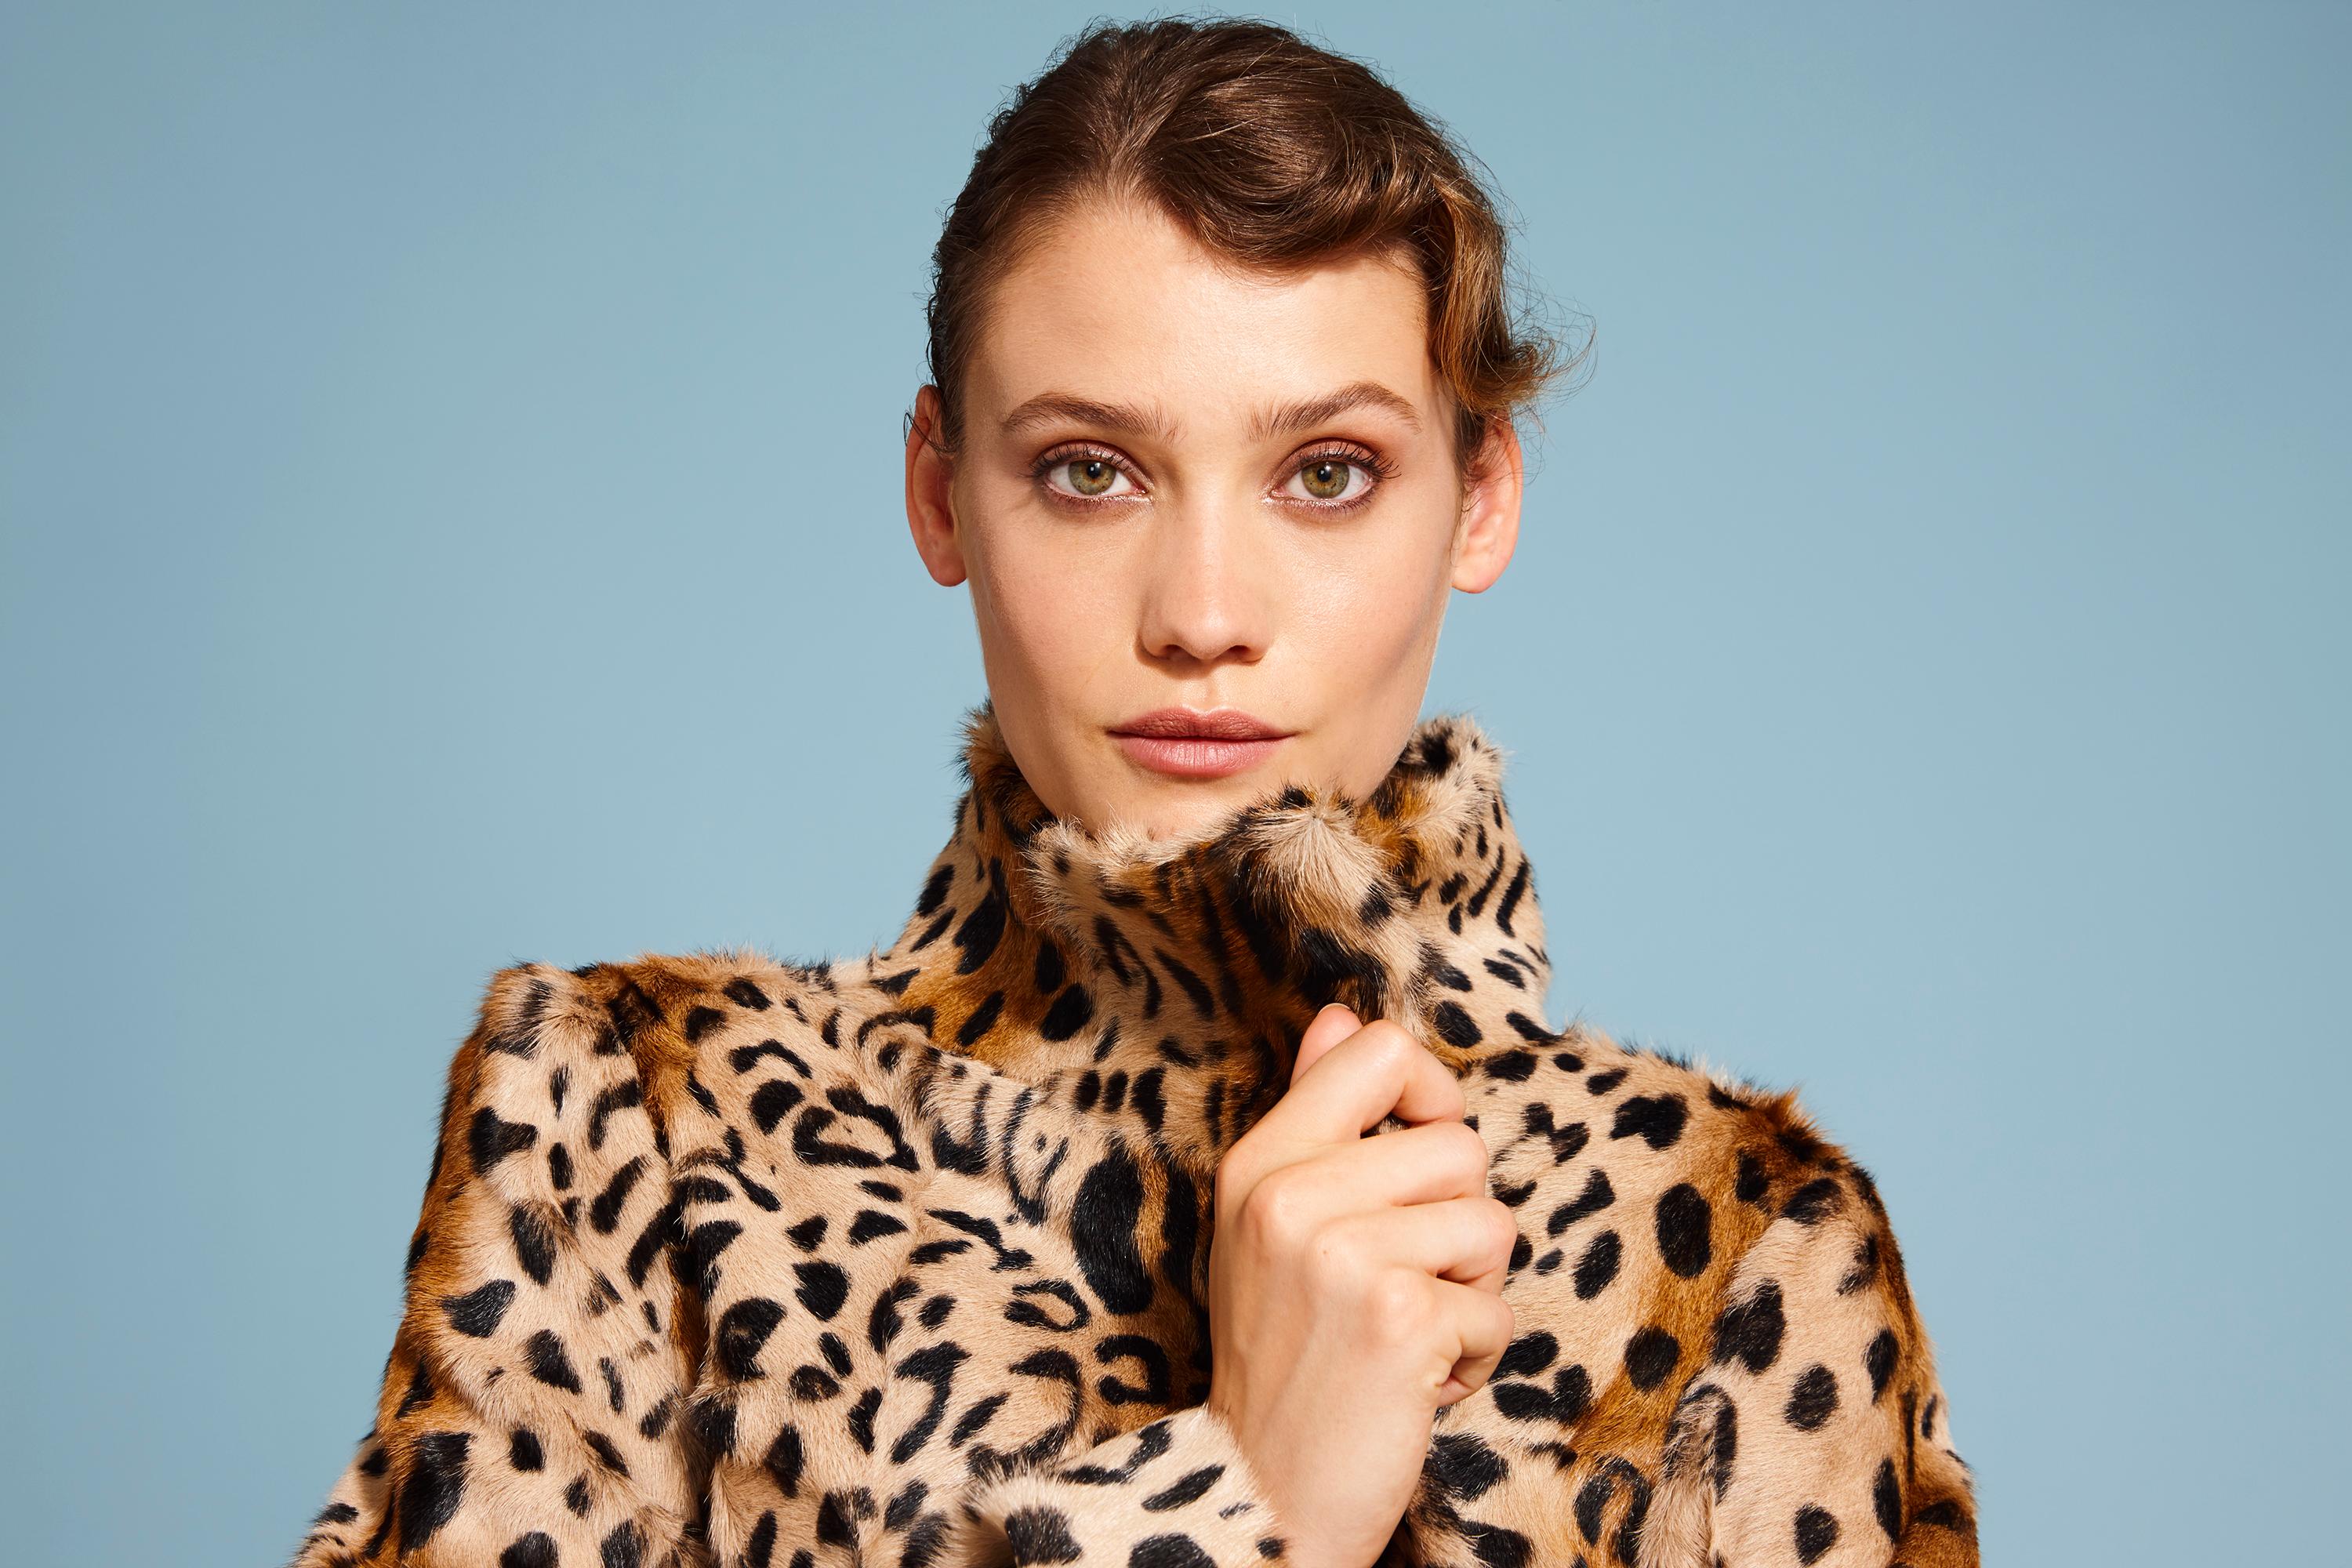 This Leopard print coat is Verheyen London’s classic staple for effortless style and glamour.

A coat for dressing up and down with jeans or a dress.

PRODUCT DETAILS

High Collar Leopard Print Coat

Size: UK 12-14
Colour: Natural

Dyed Printed Goat